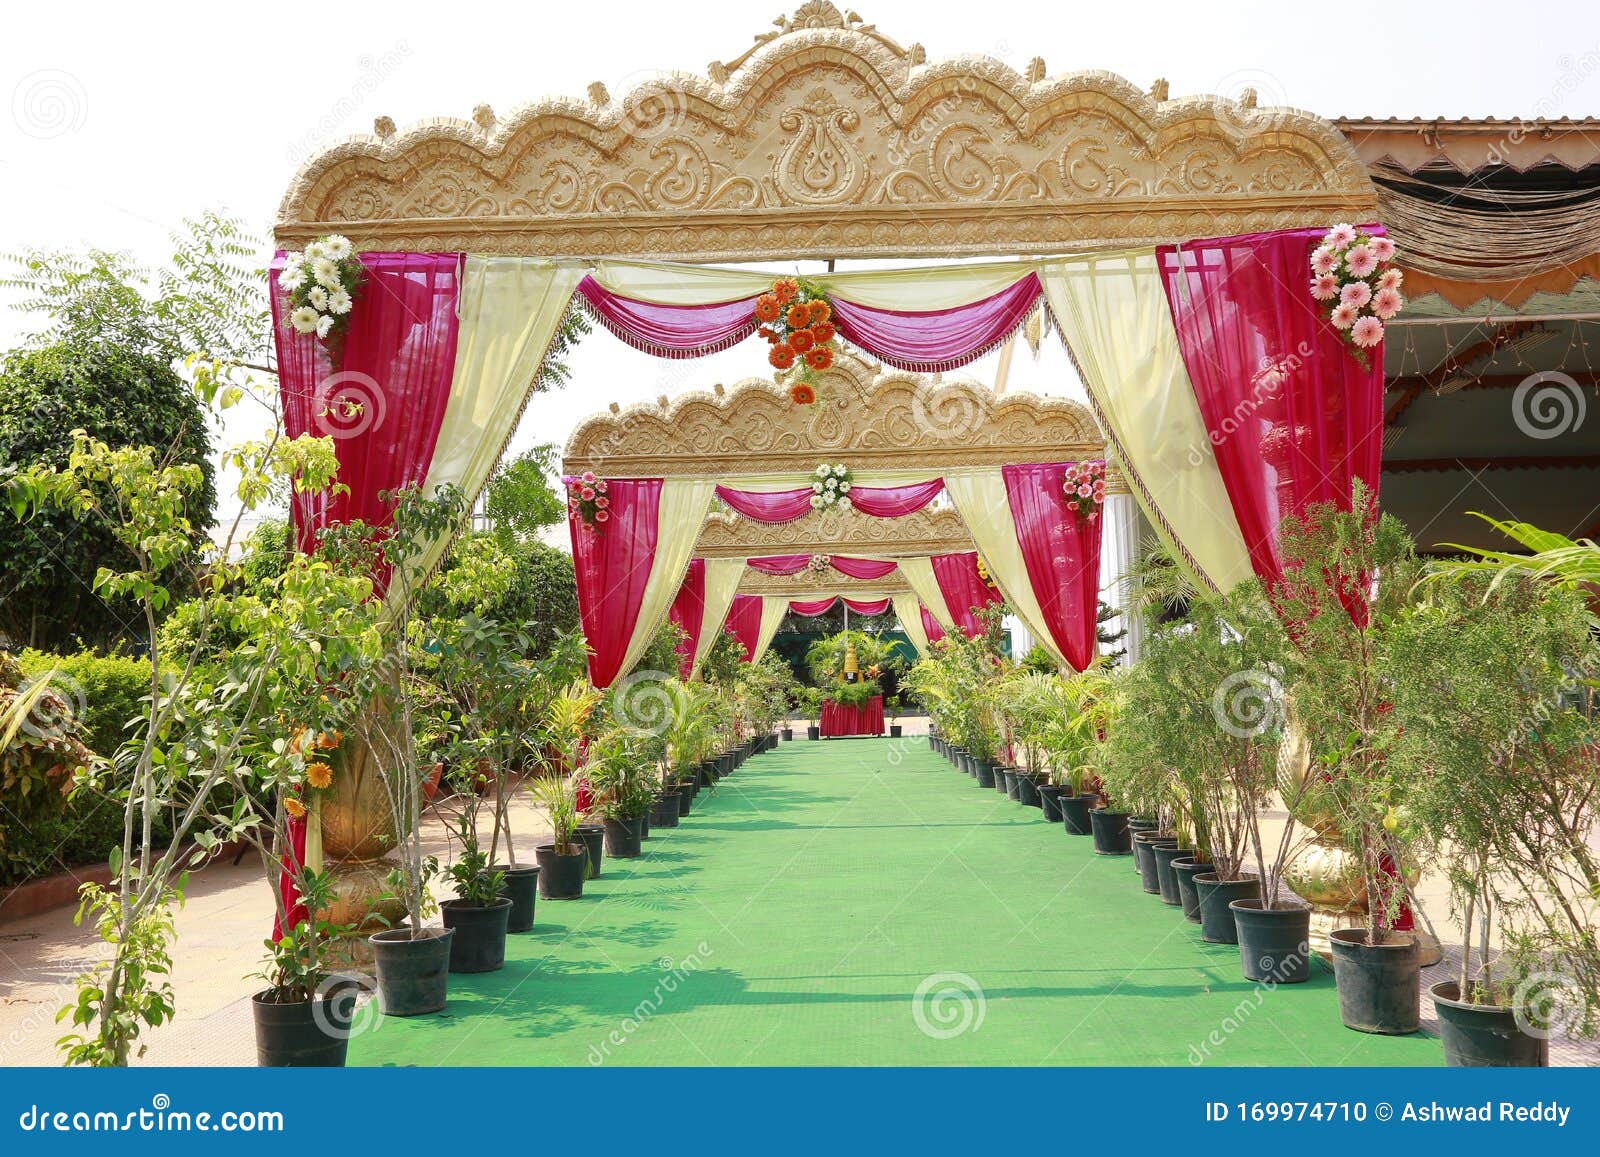 Decoration at the Entrance of a Marriage Ceremony Stock Photo ...